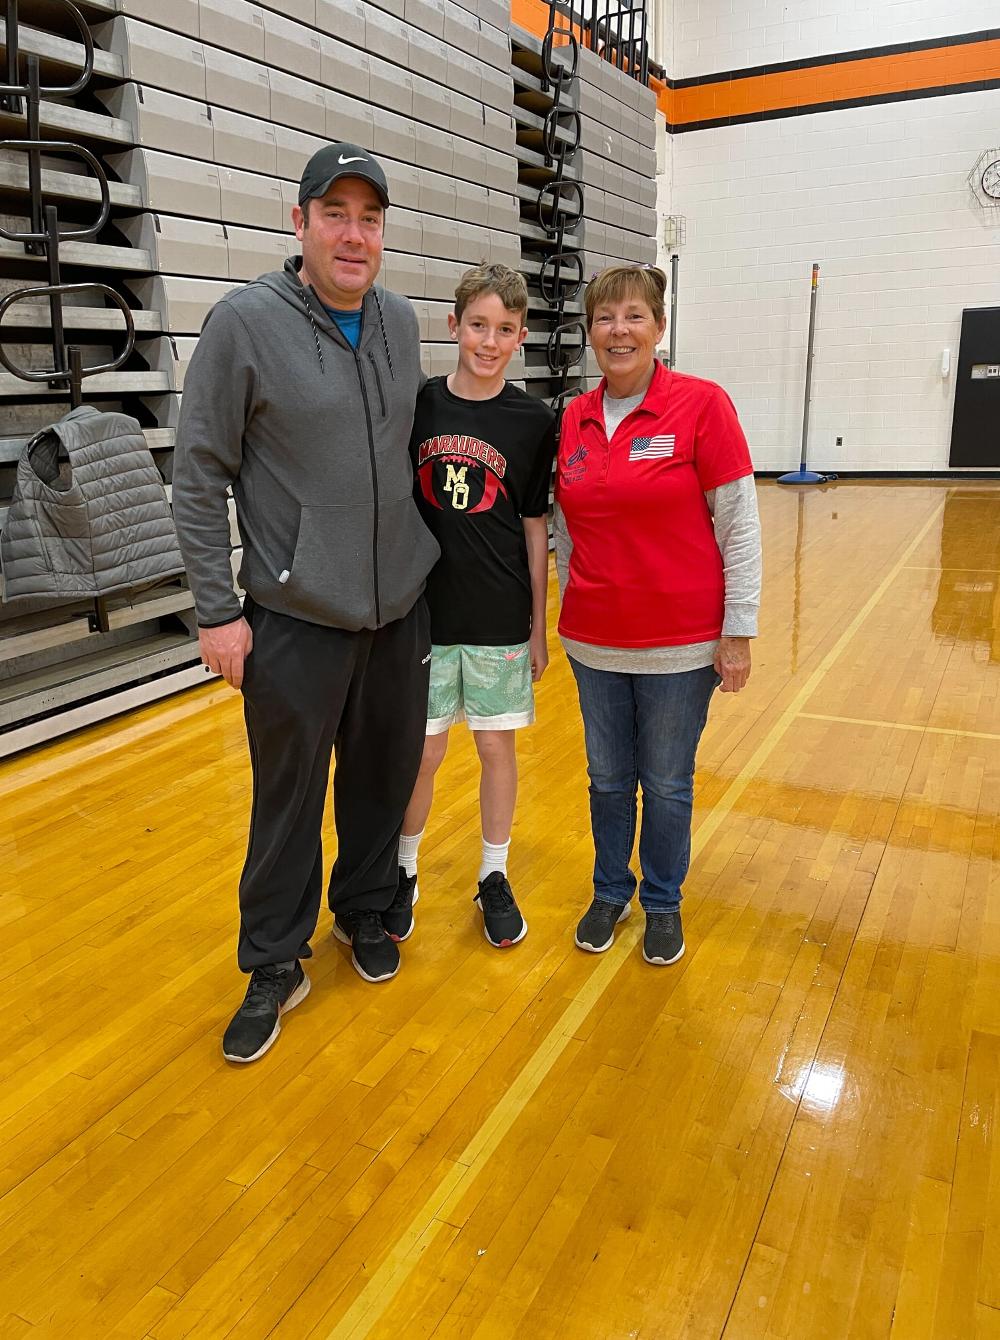 Member, Helene Walsh, with a dad and his son who participated in our Hoop Shoot.